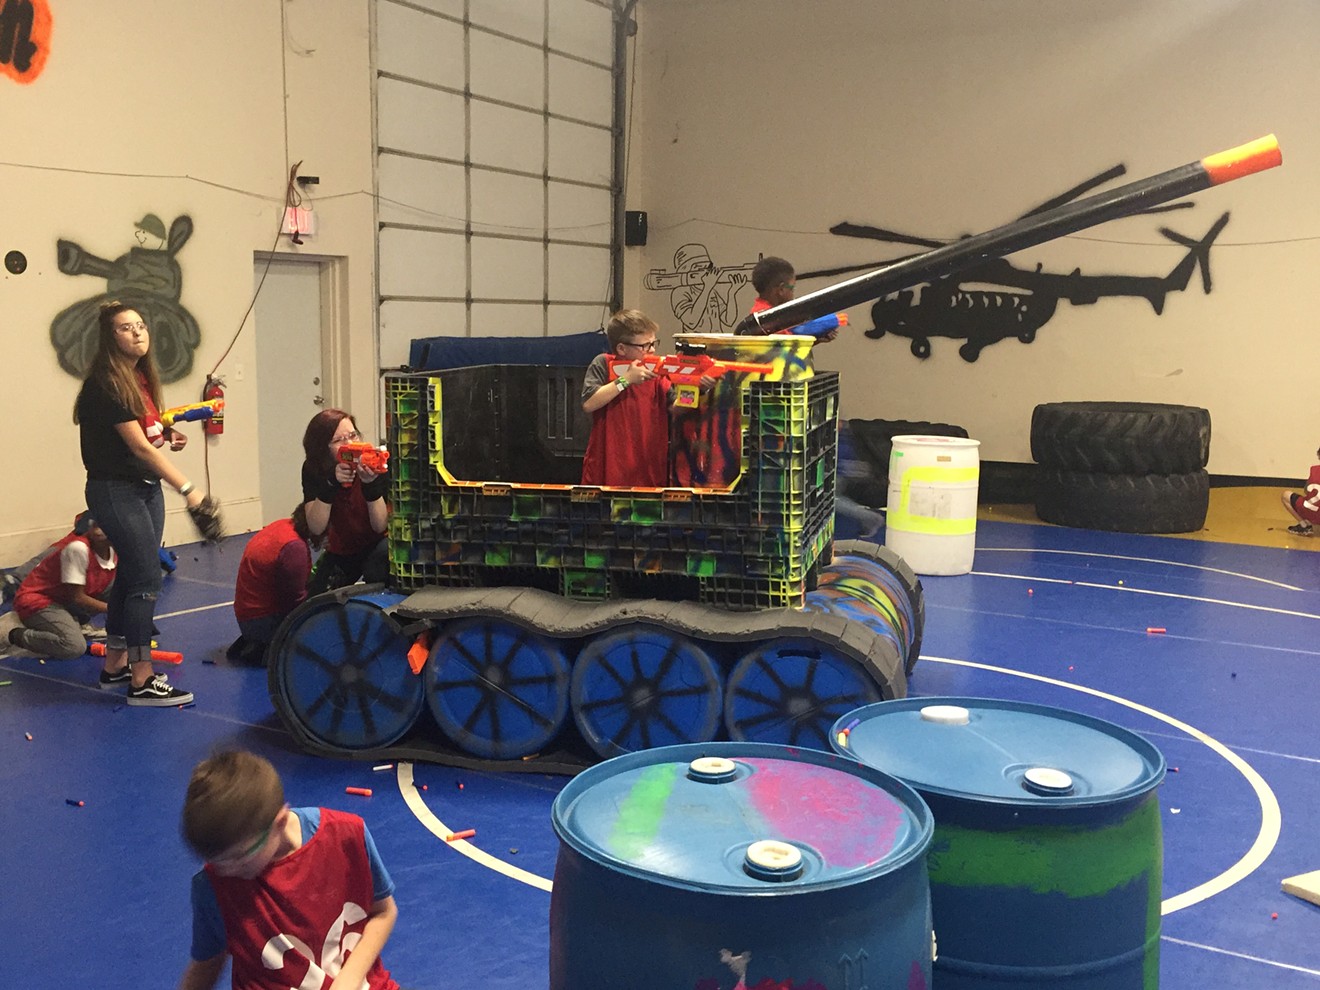 A team of Nerf warriors holds its position in a mock tank at The Battlefield, a facility in Denton that pits teams of Nerf toting warriors against each other every weekend.